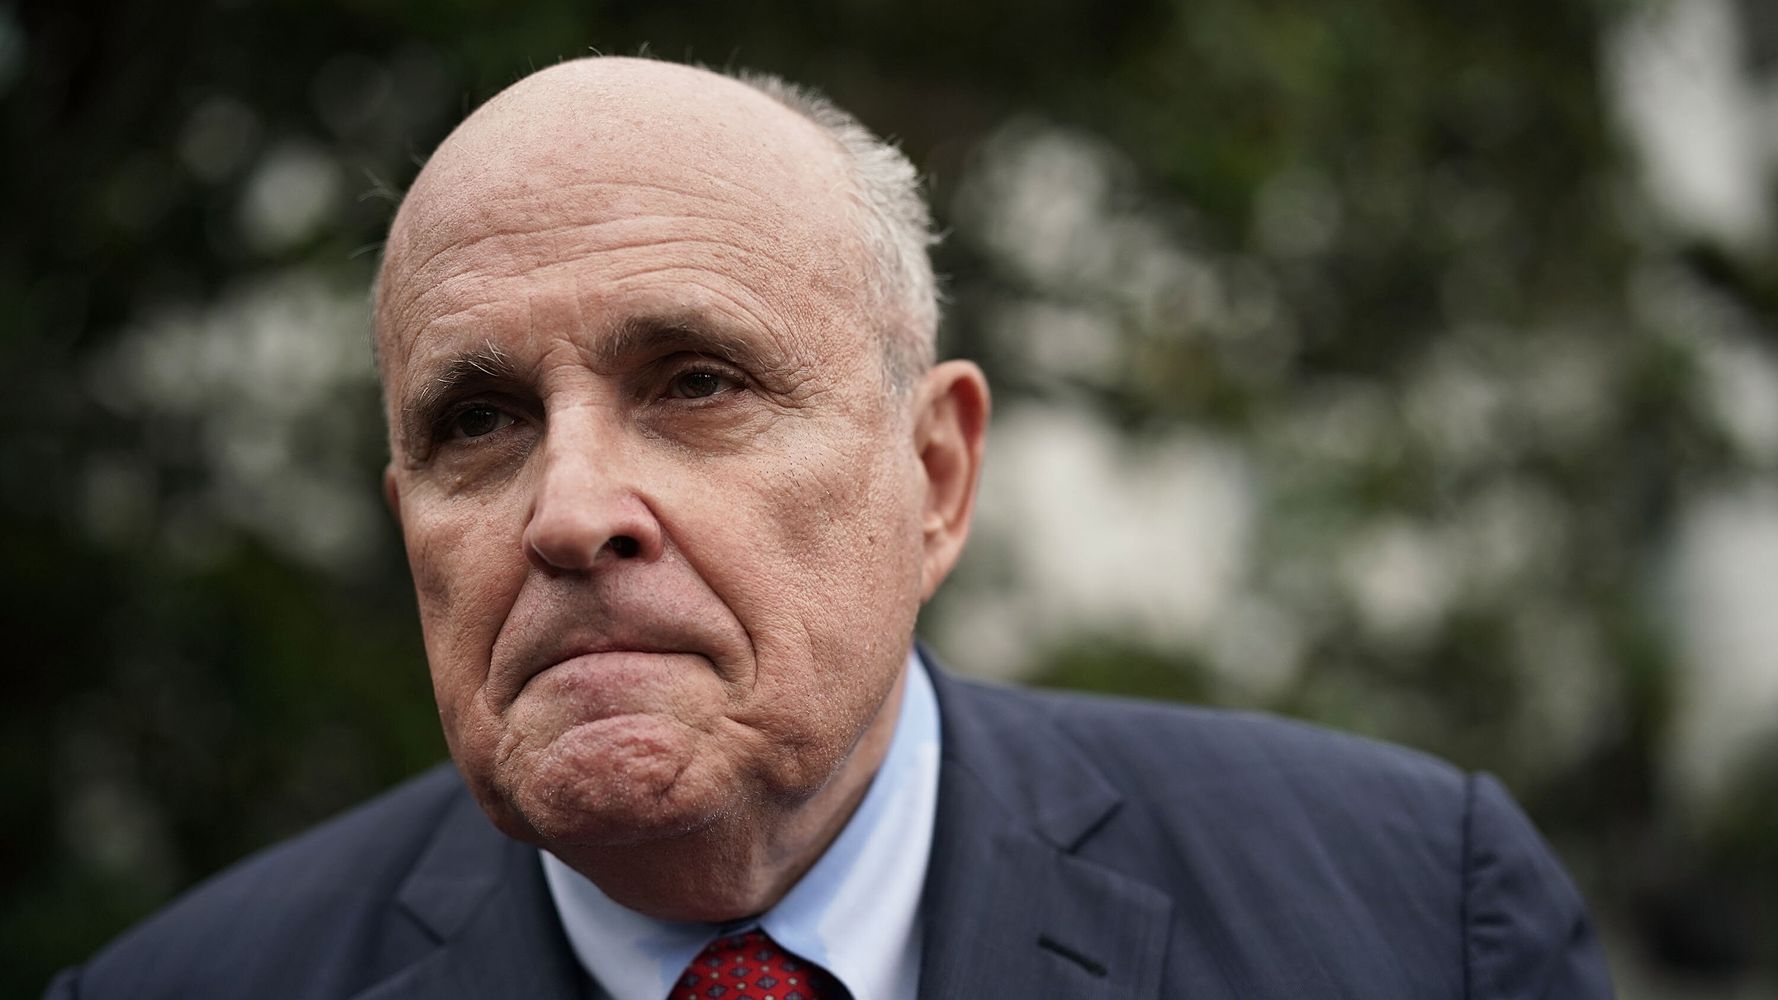 Rudy Giuliani Suspended From Practicing Law In New York